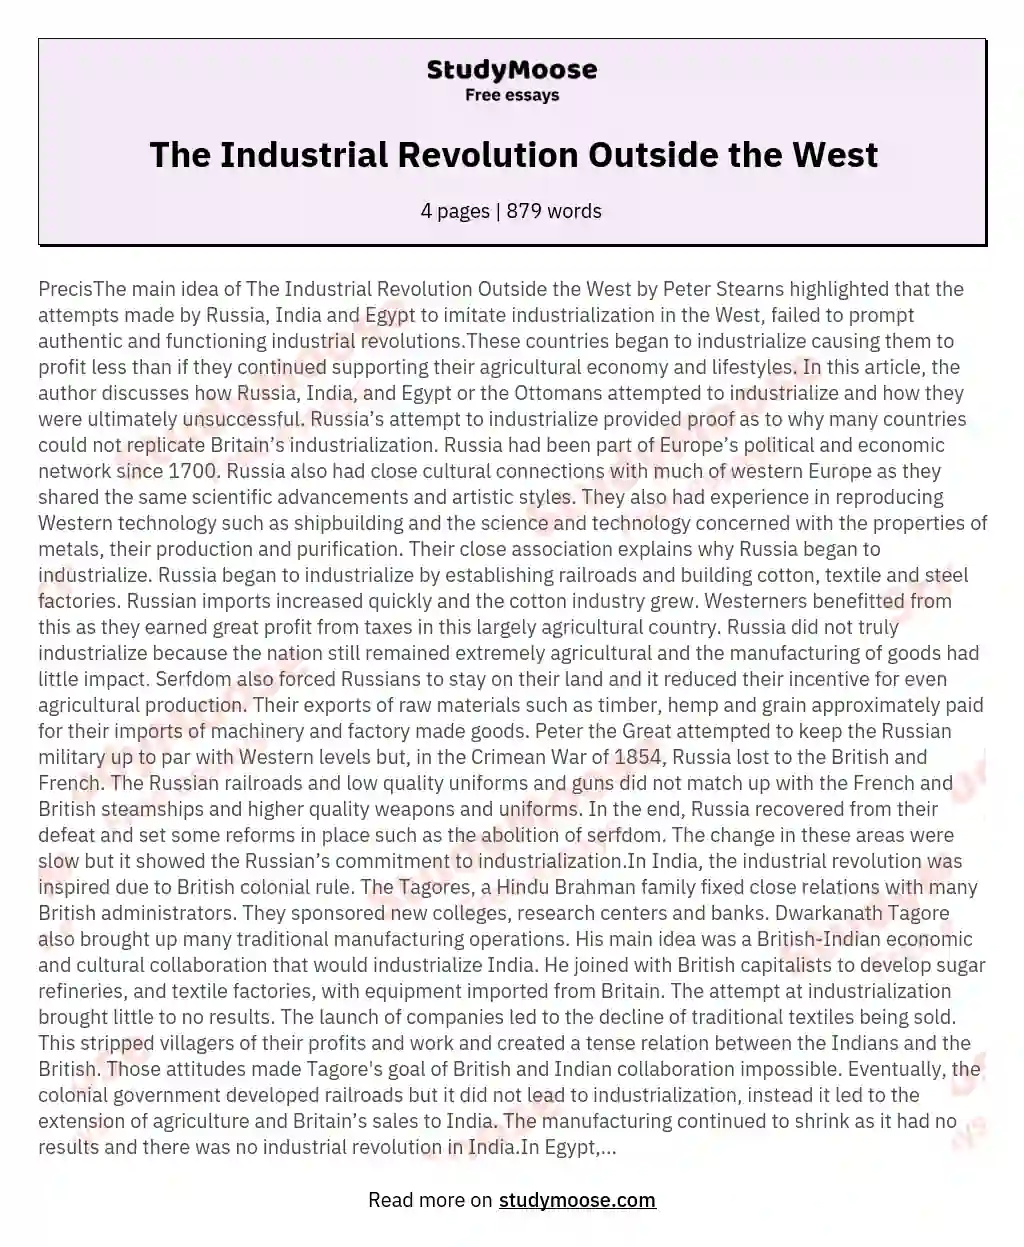 The Industrial Revolution Outside the West essay